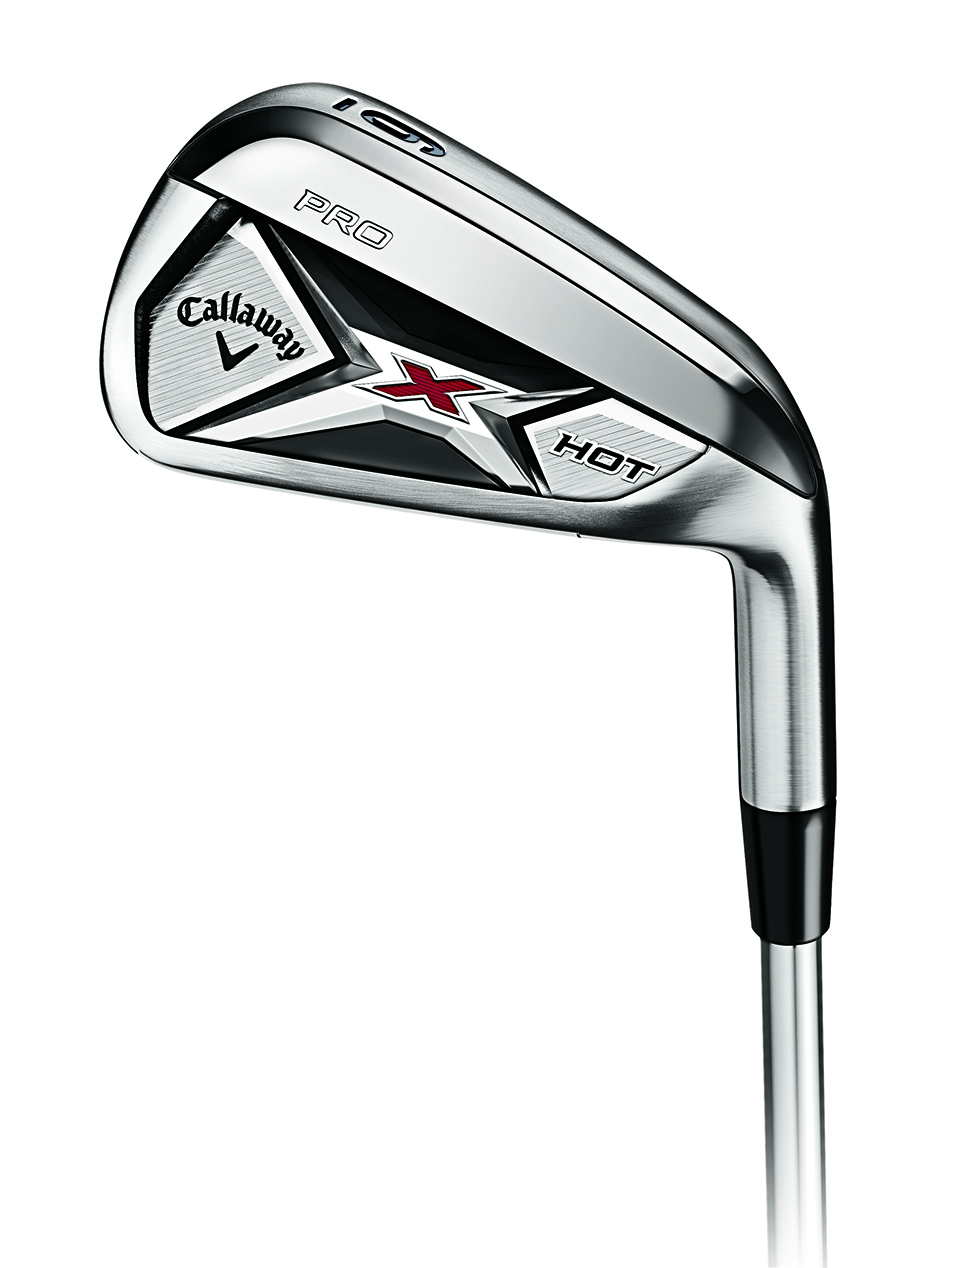 Callaway X Hot Pro Iron Review (Clubs 